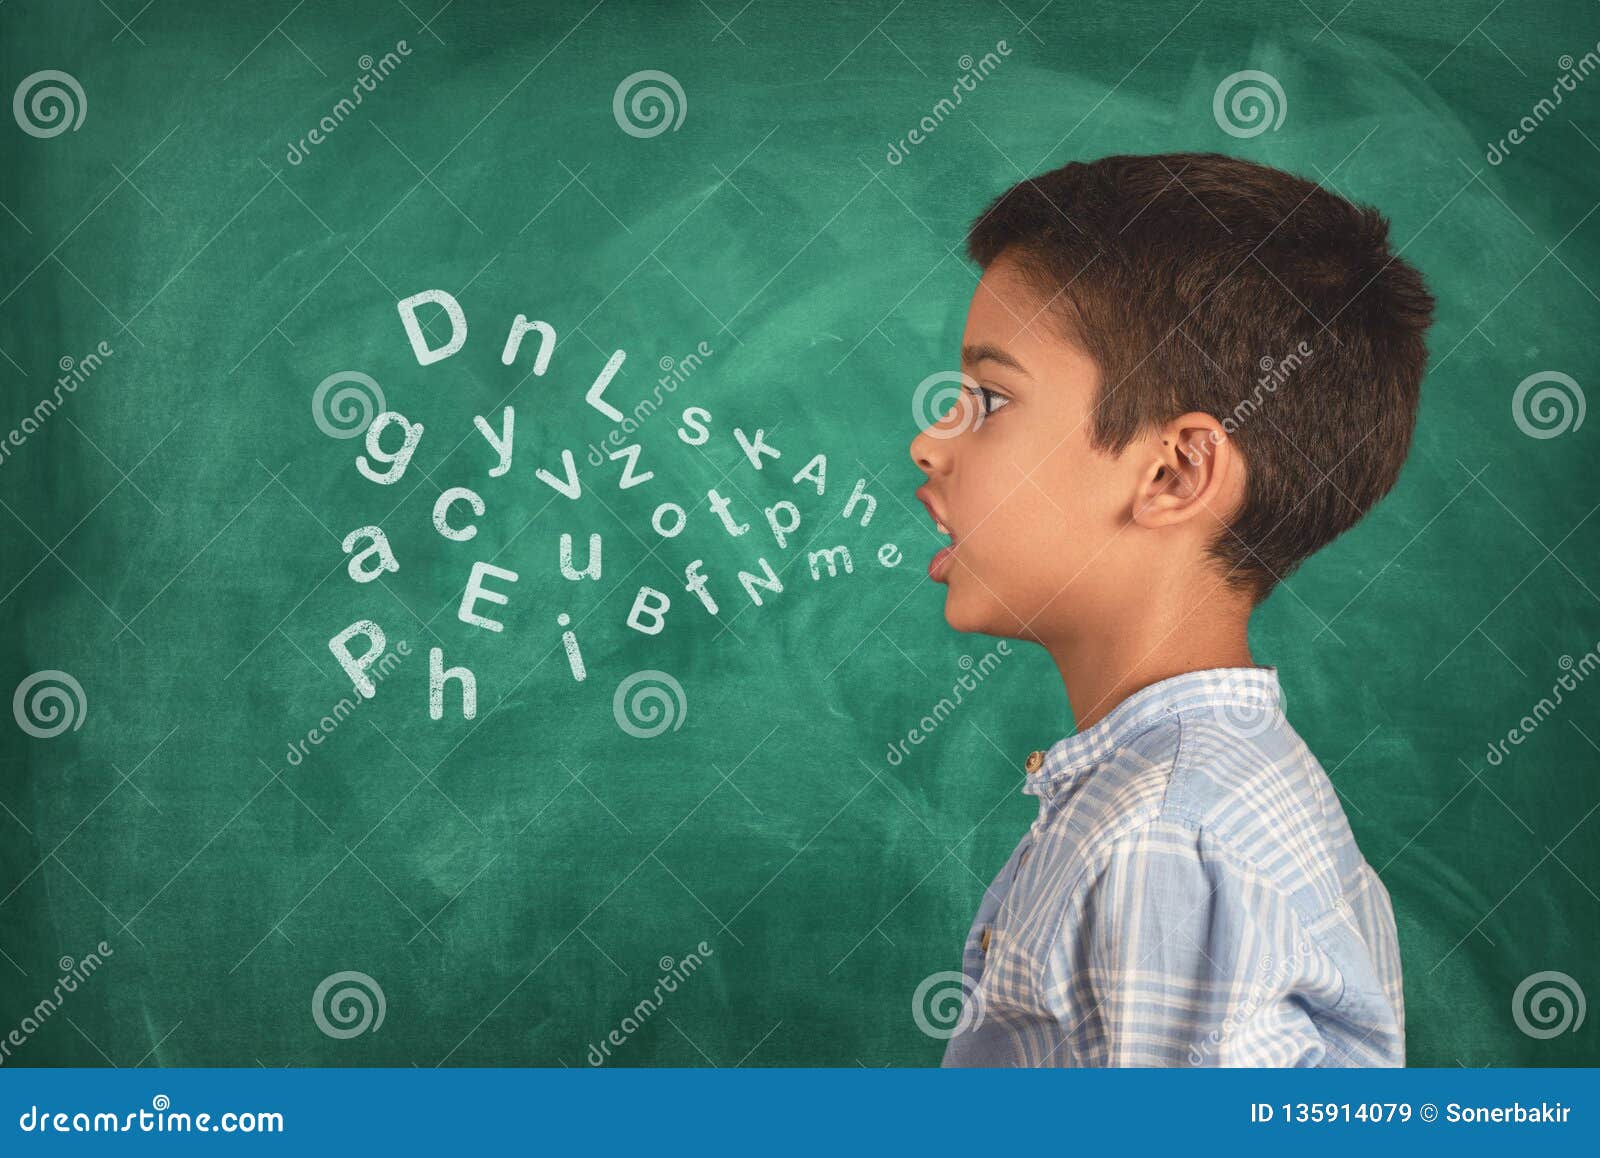 child speaking and alphabet letters coming out of his mouth